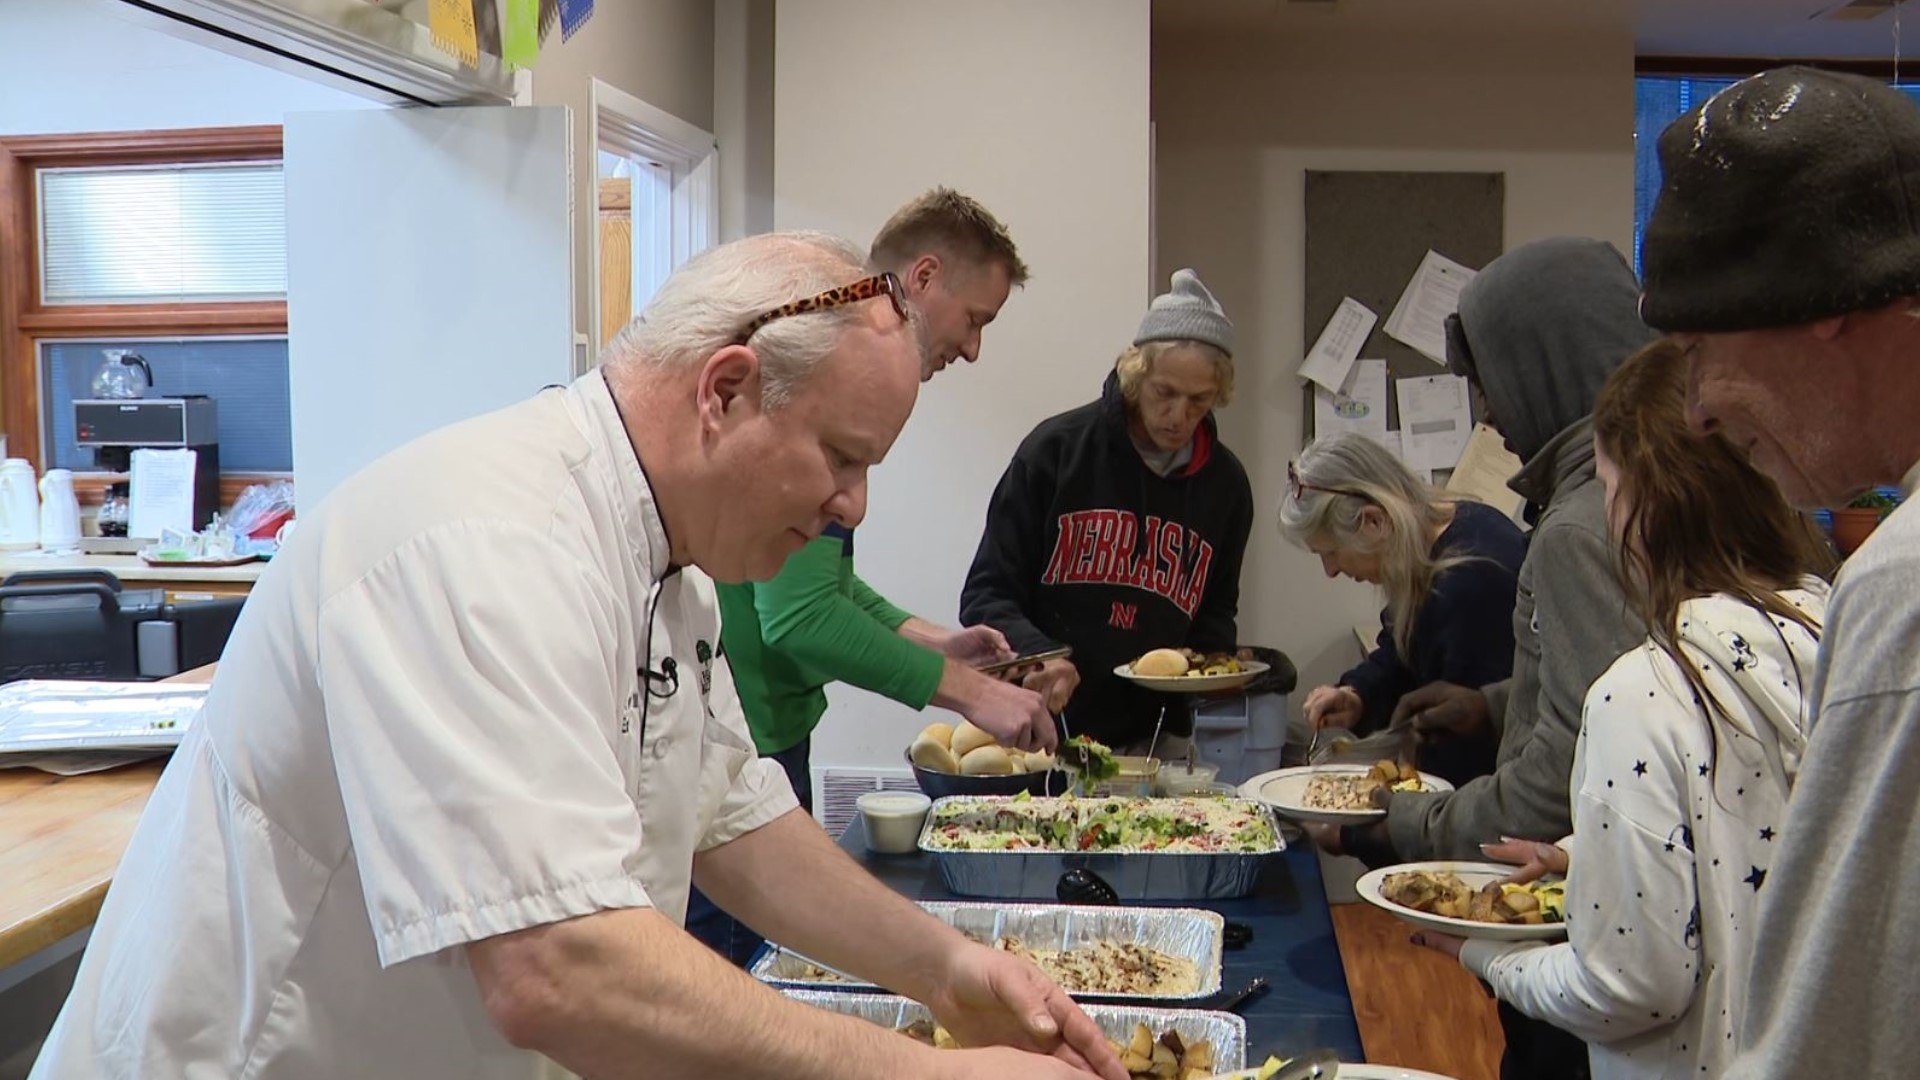 Chef Jack MacMurray has been in the business for more than 30 years. Two Thursdays a month, he helps make food for those experiencing homelessness in St. Louis.